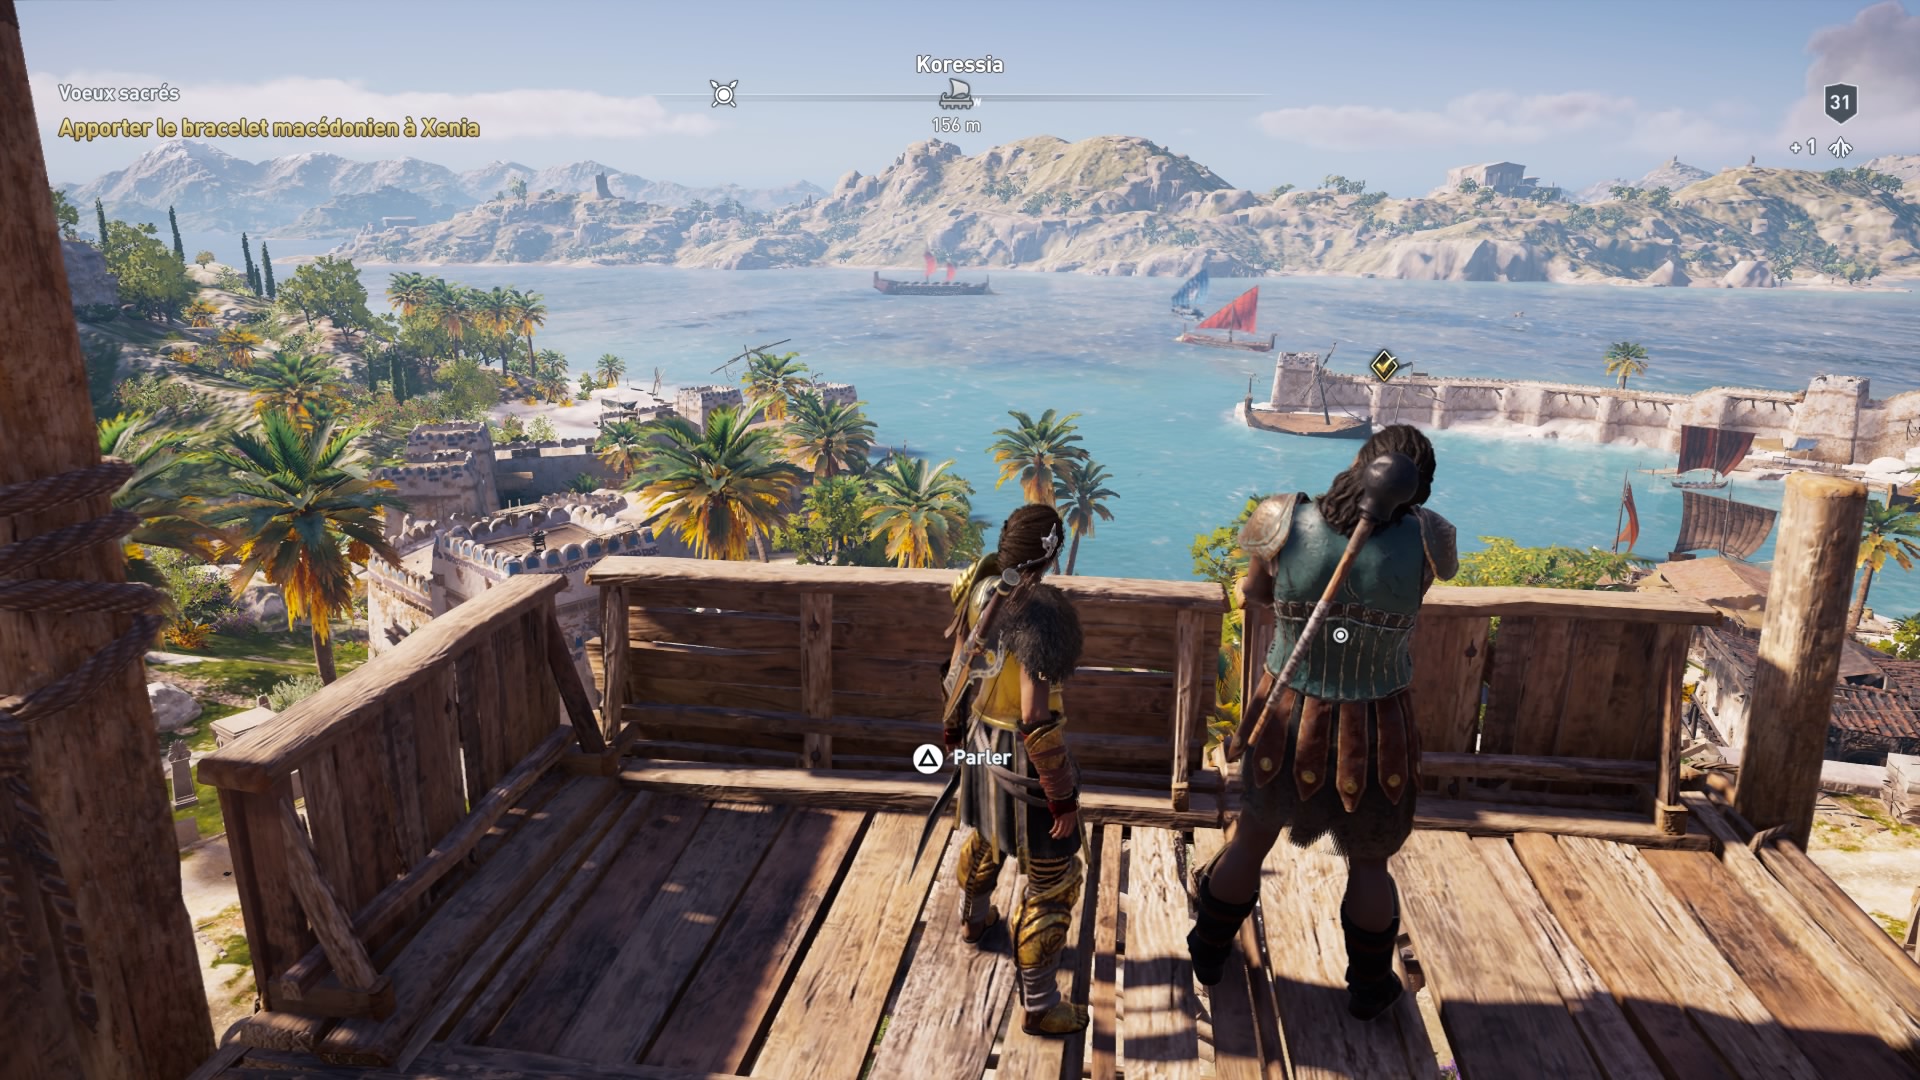 Assassin's creed odyssey